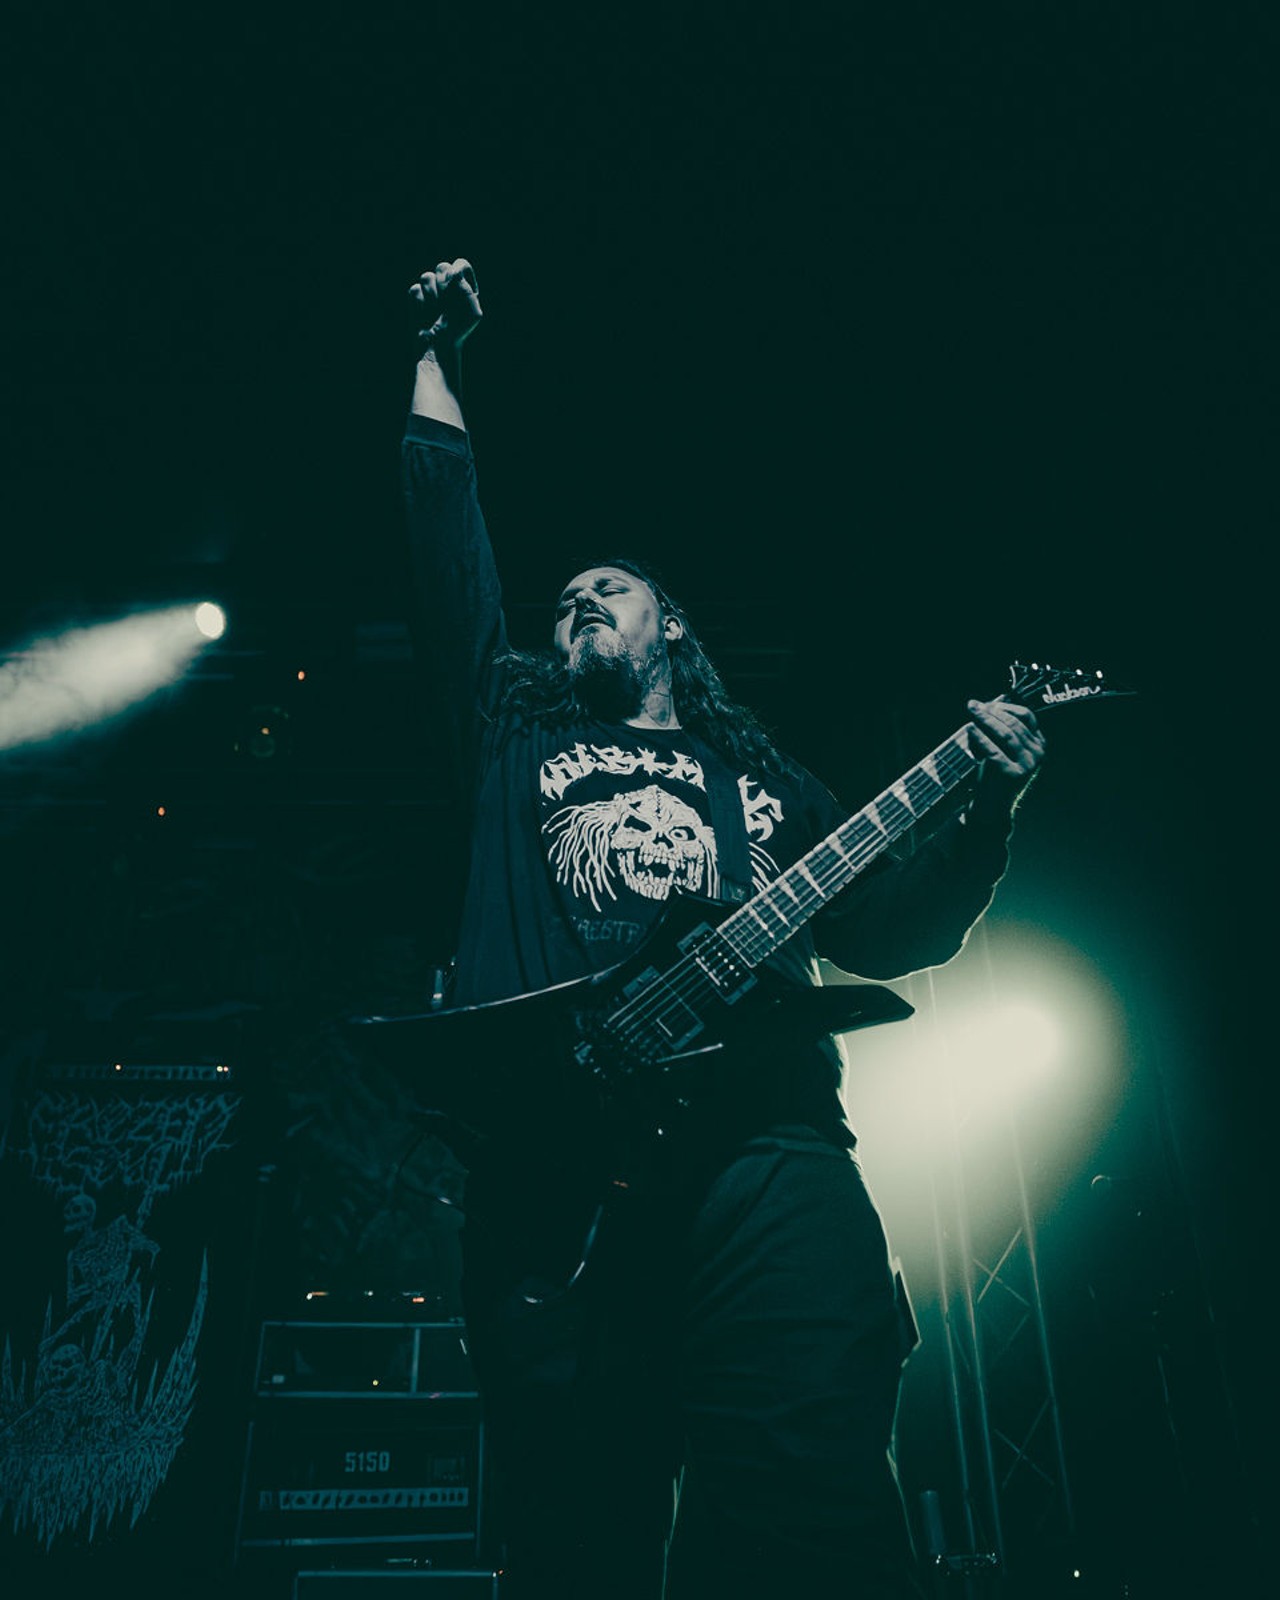 Photos: Black Dahlia Murder and friends take over The Ritz in Ybor City